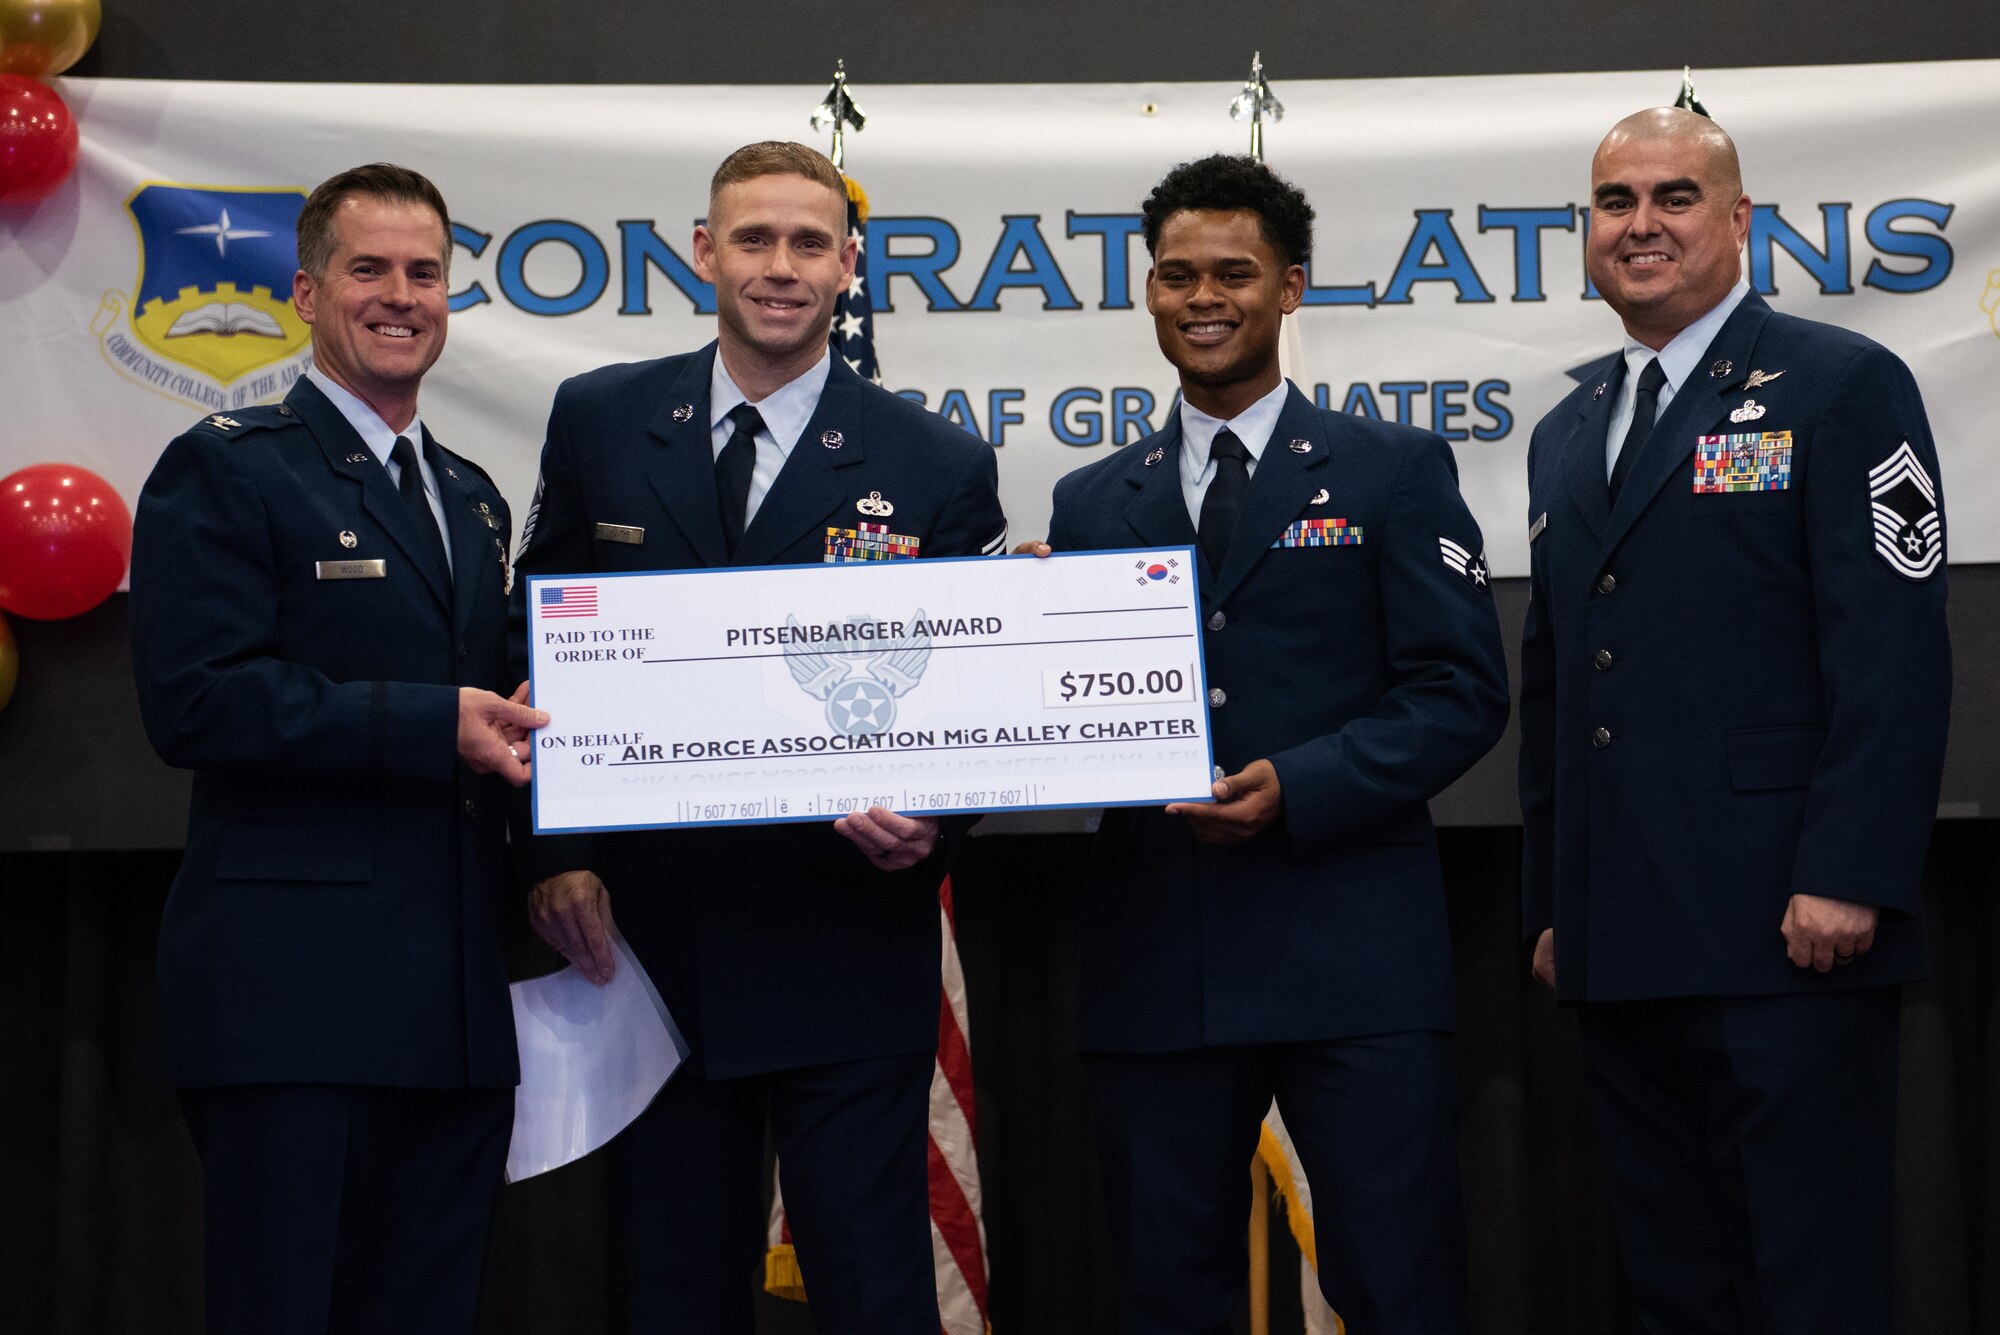 U.S. Air Force Senior Airman Casa Abraham Stuckey, 607th Materiel Maintenance Squadron client systems technician, is awarded the Pitsenbarger Award during a Community College of the Air Force graduation ceremony at Osan Air Base, Republic of Korea, Nov. 15, 2022.